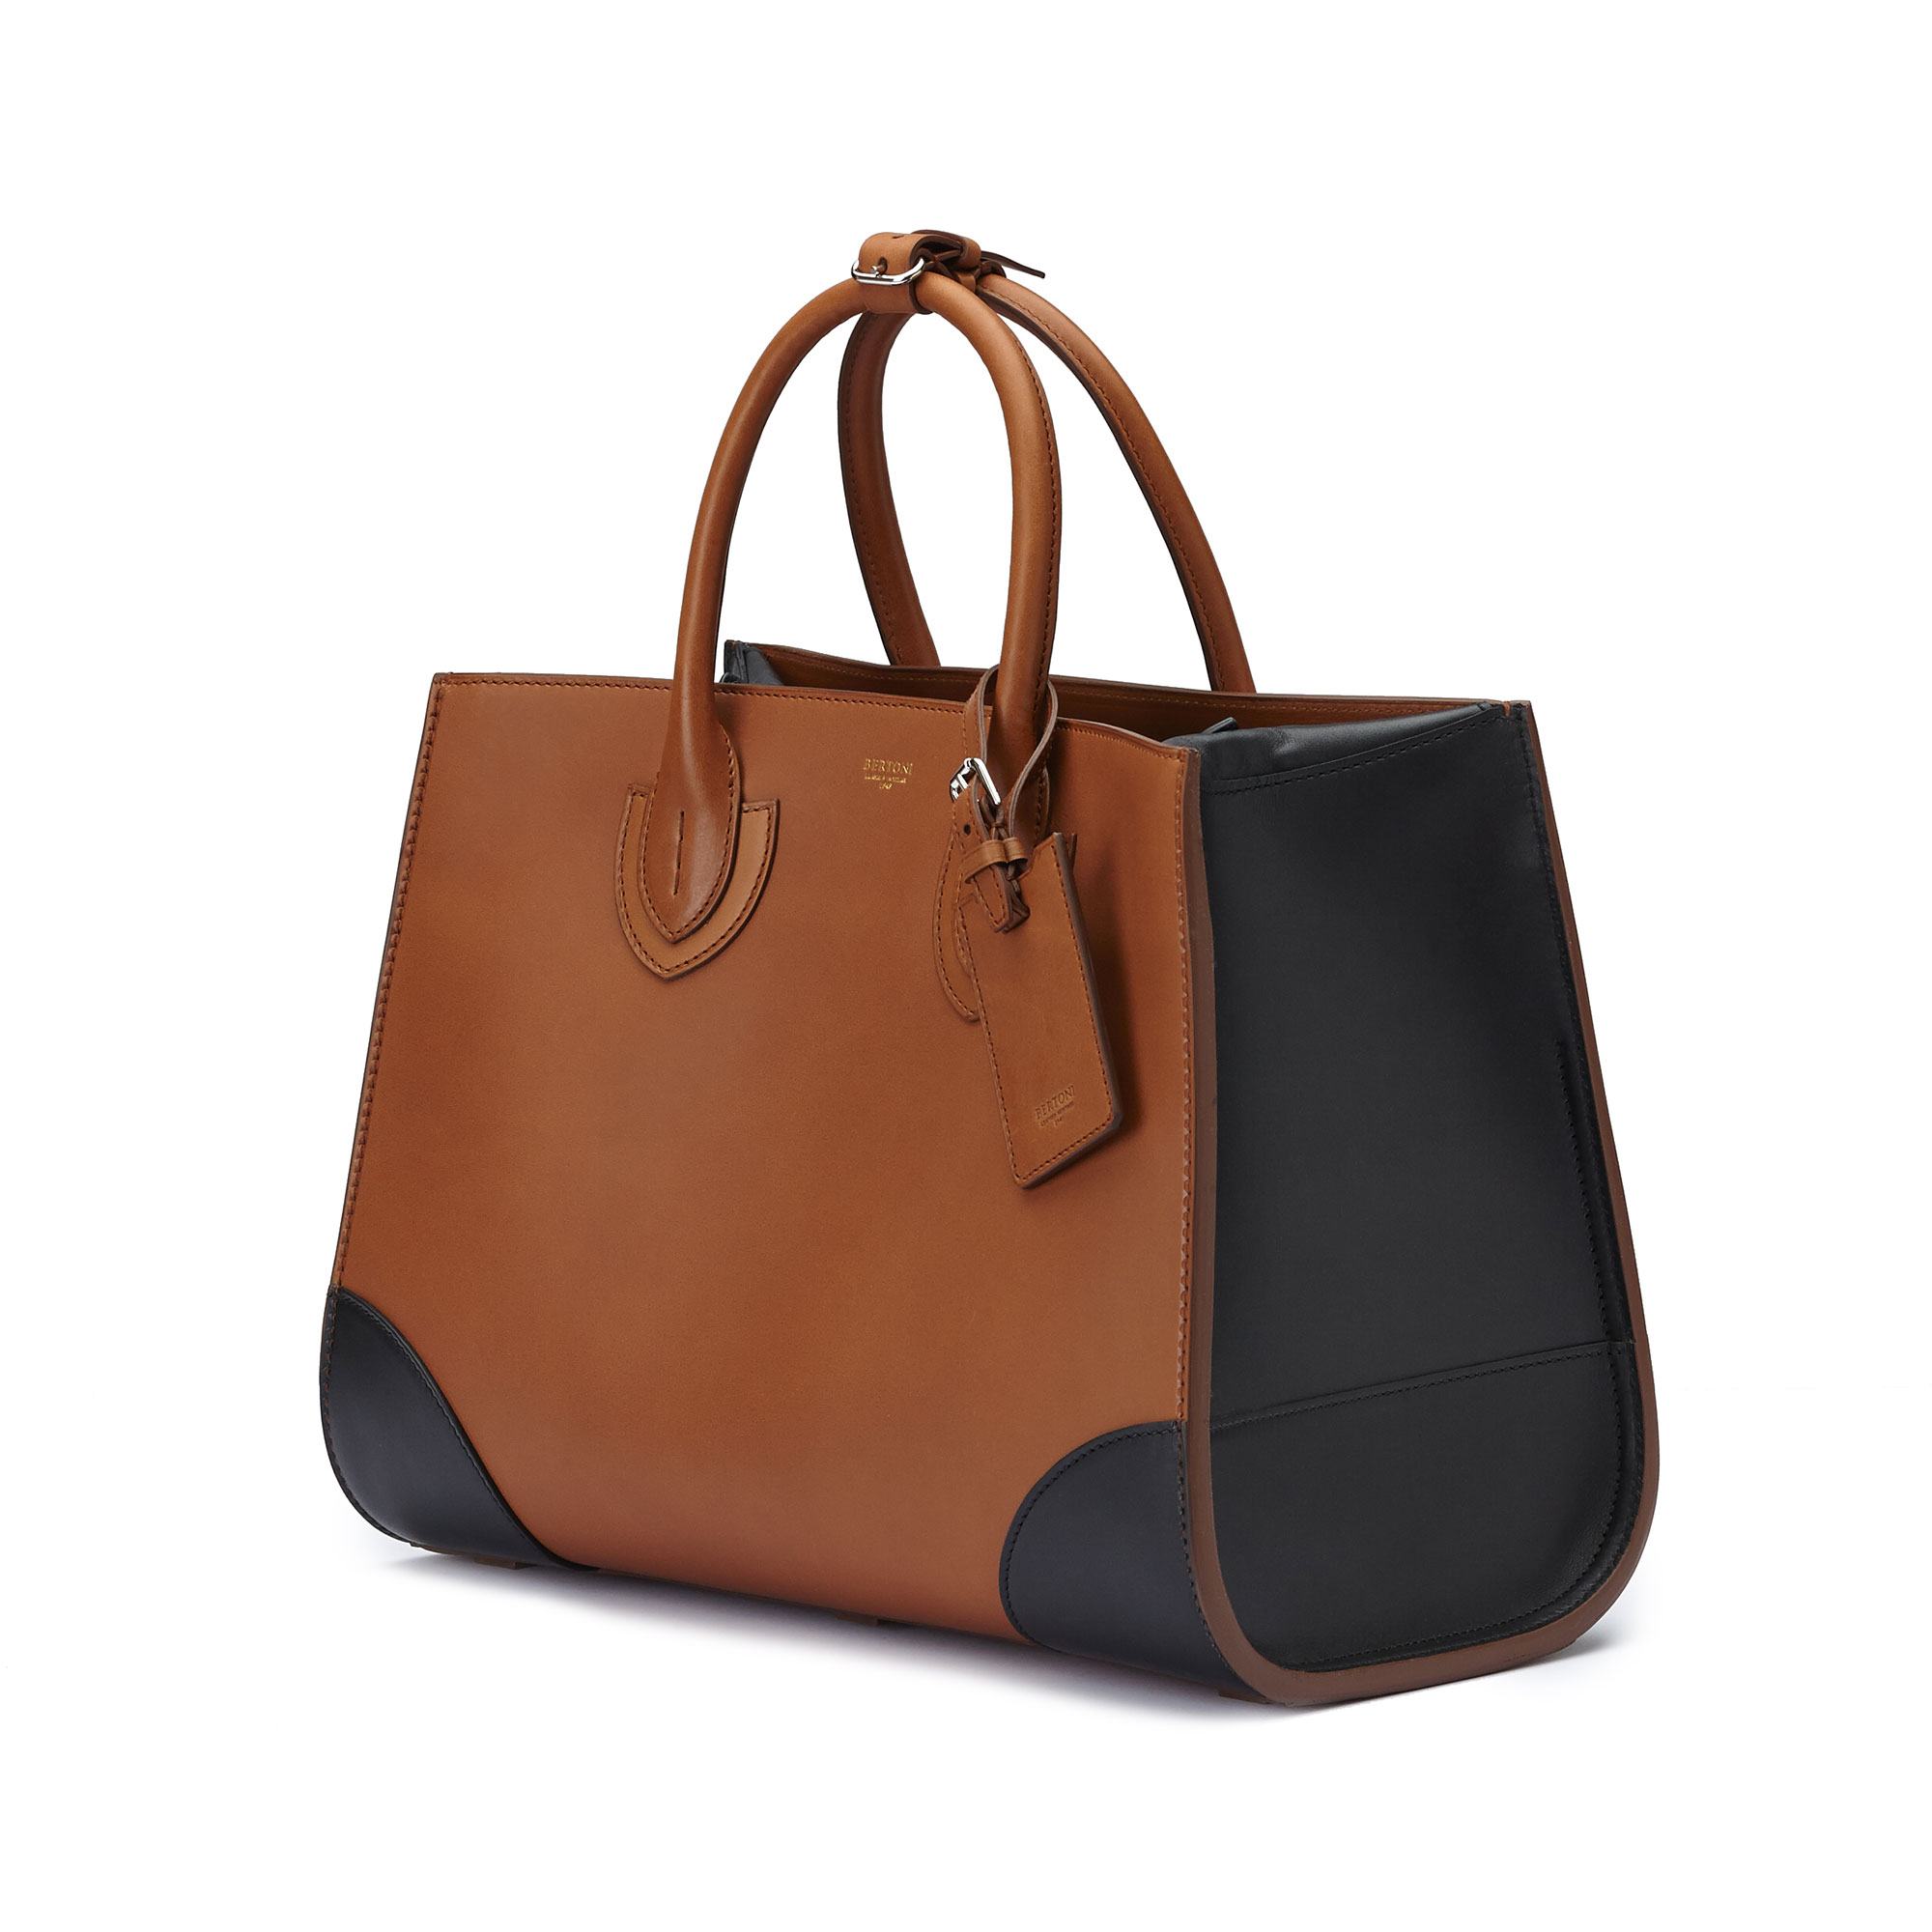 The terrabruciata and black french calf Darcy large bag by Bertoni 1949 03